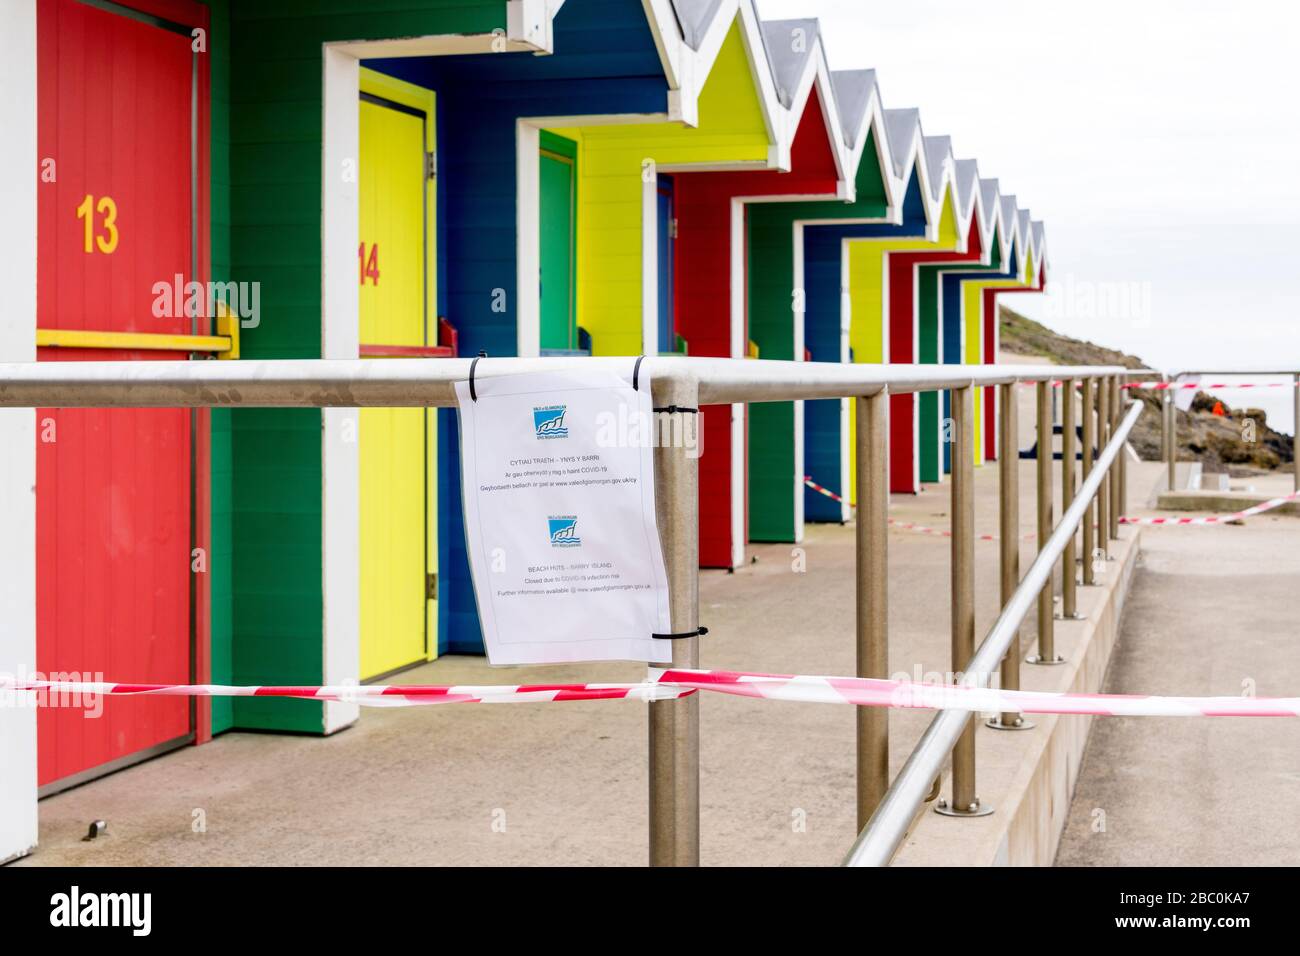 Beach huts at Barry Island are taped off and a council notice prohibits access during the Covid-19 crises. Stock Photo